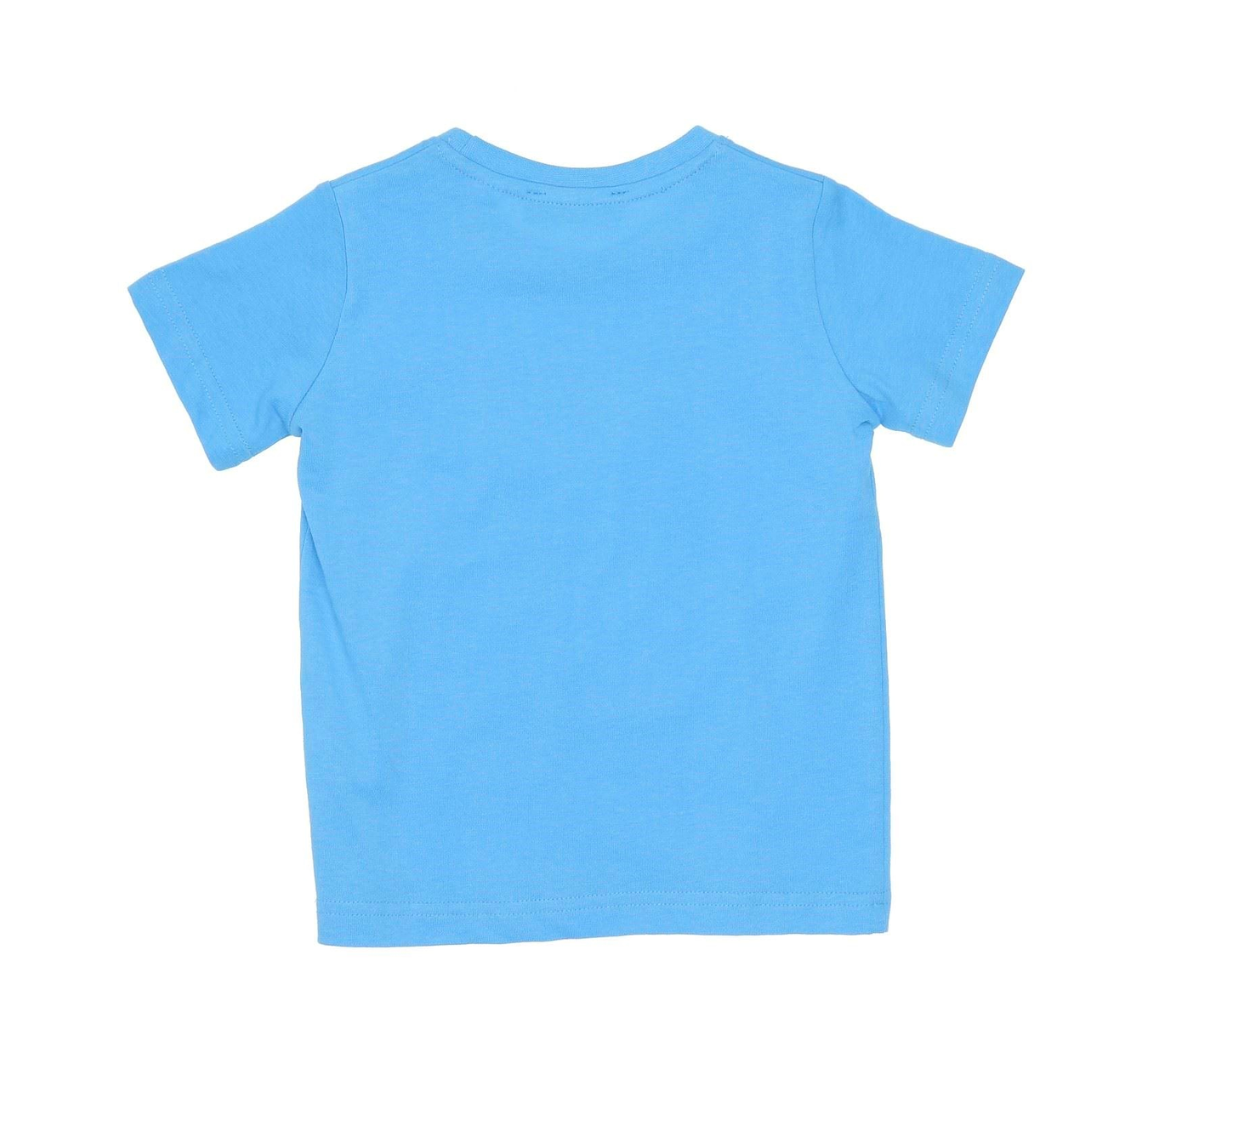 HARMONT &amp; BLAINE - Dachshunds blue t-shirt - 2 years old